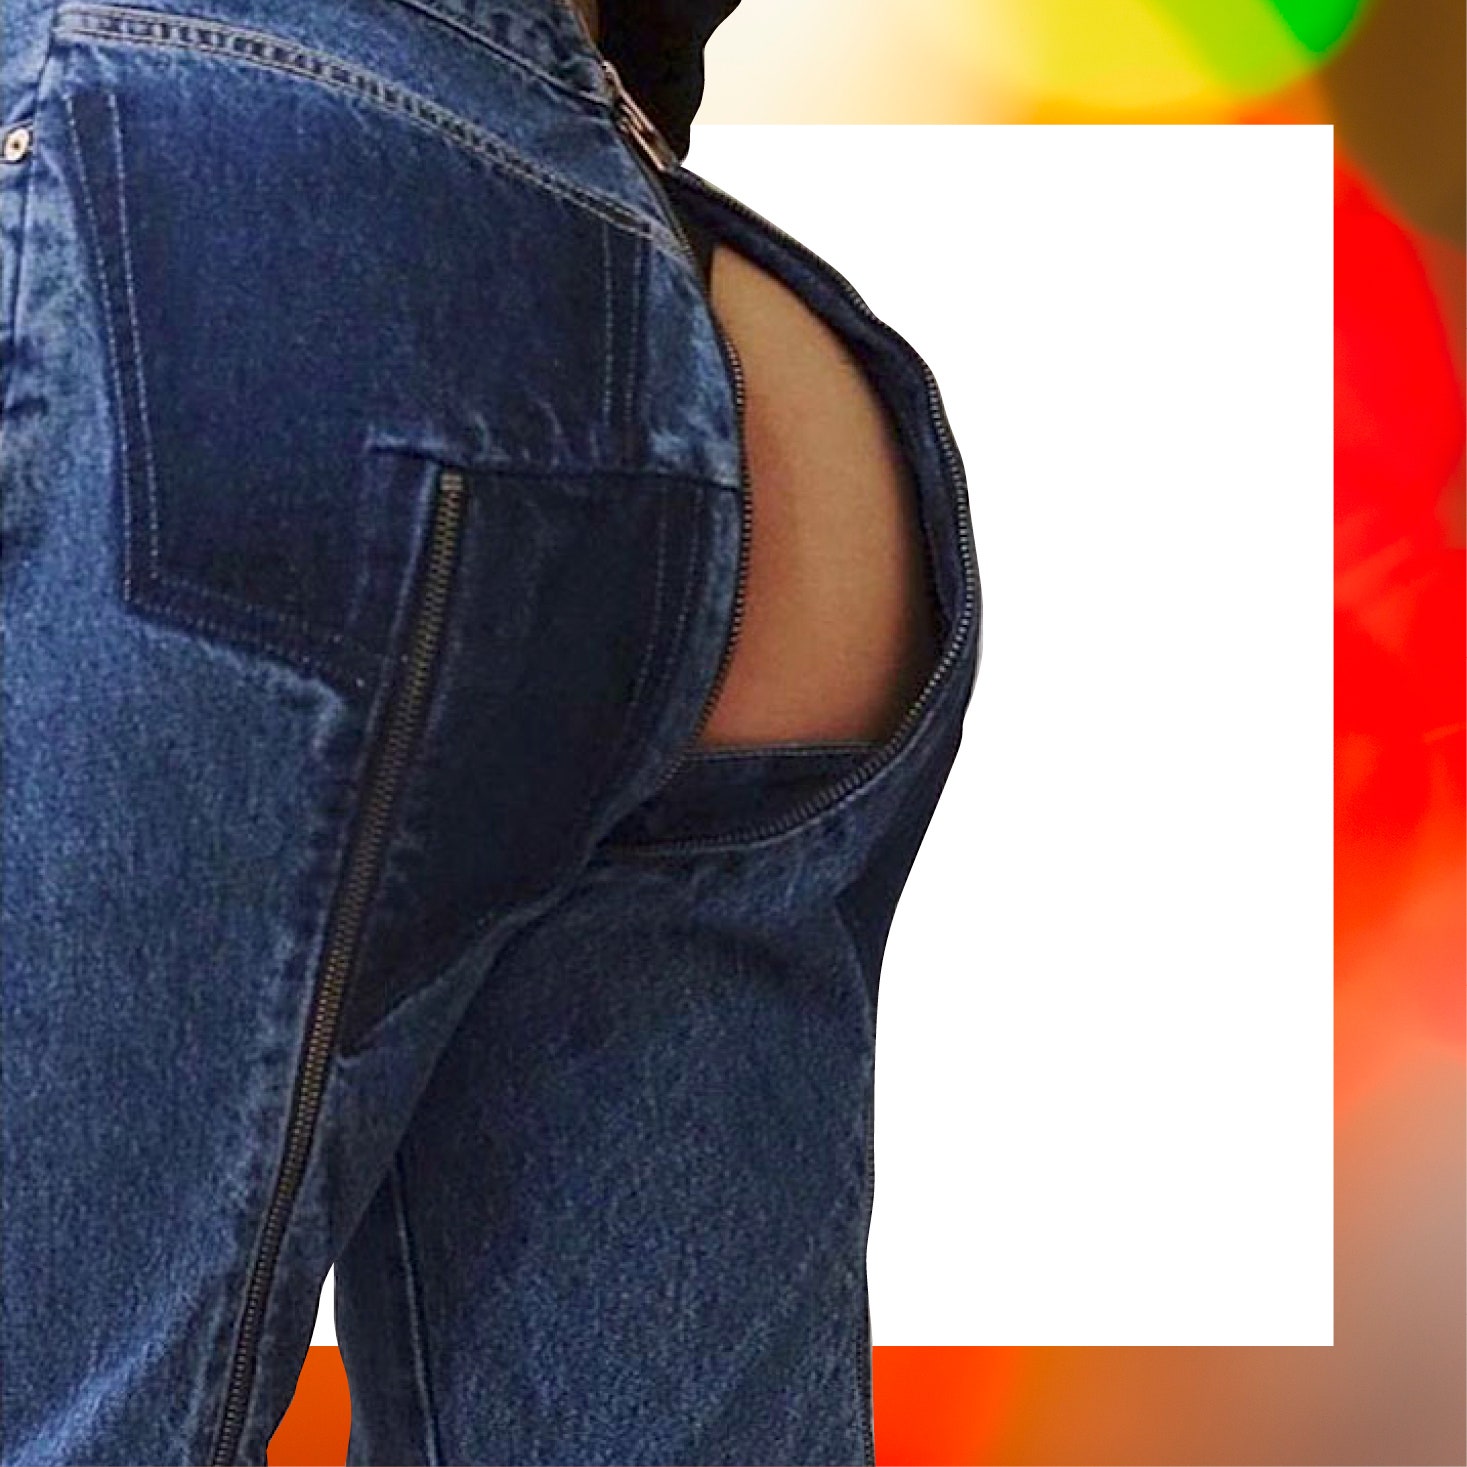 andrew rix share ass in them jeans photos